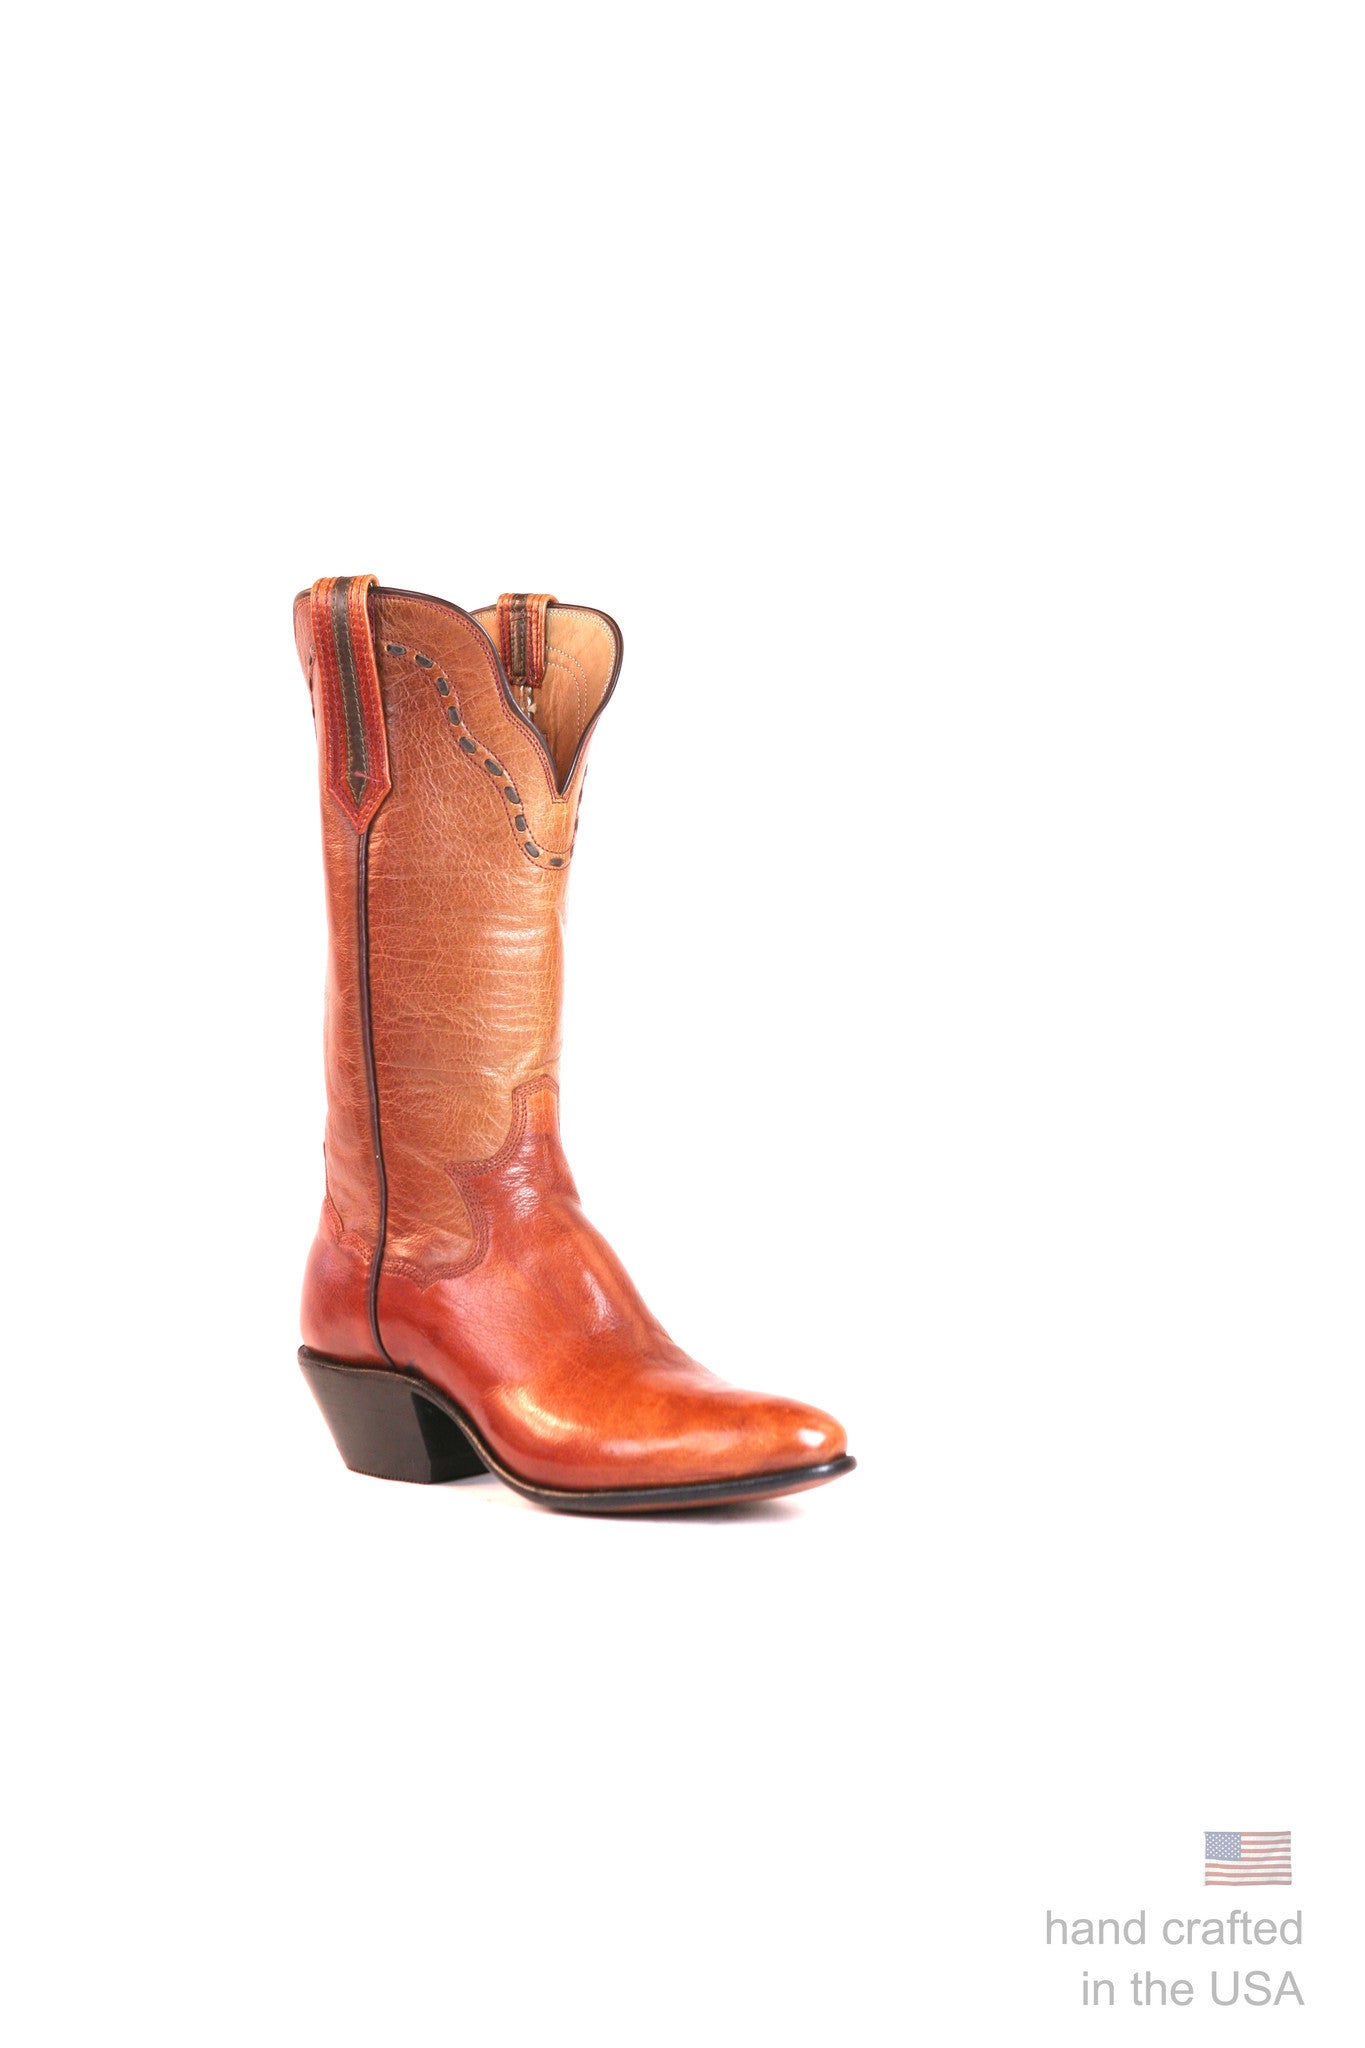 Singles: Boot 0016: Size 5A